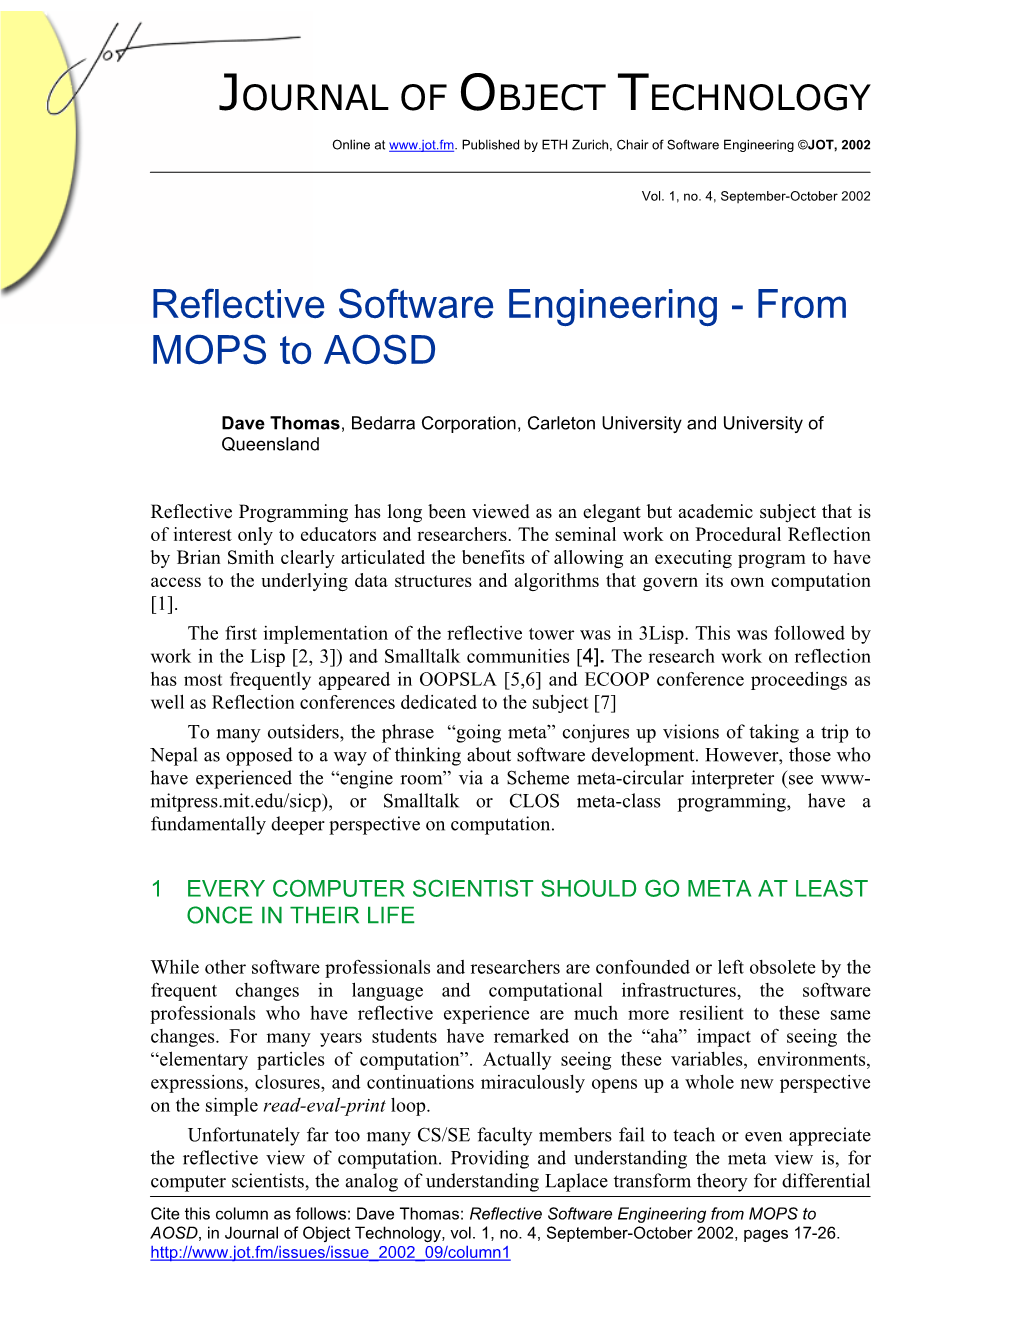 Reflective Software Engineering - from MOPS to AOSD